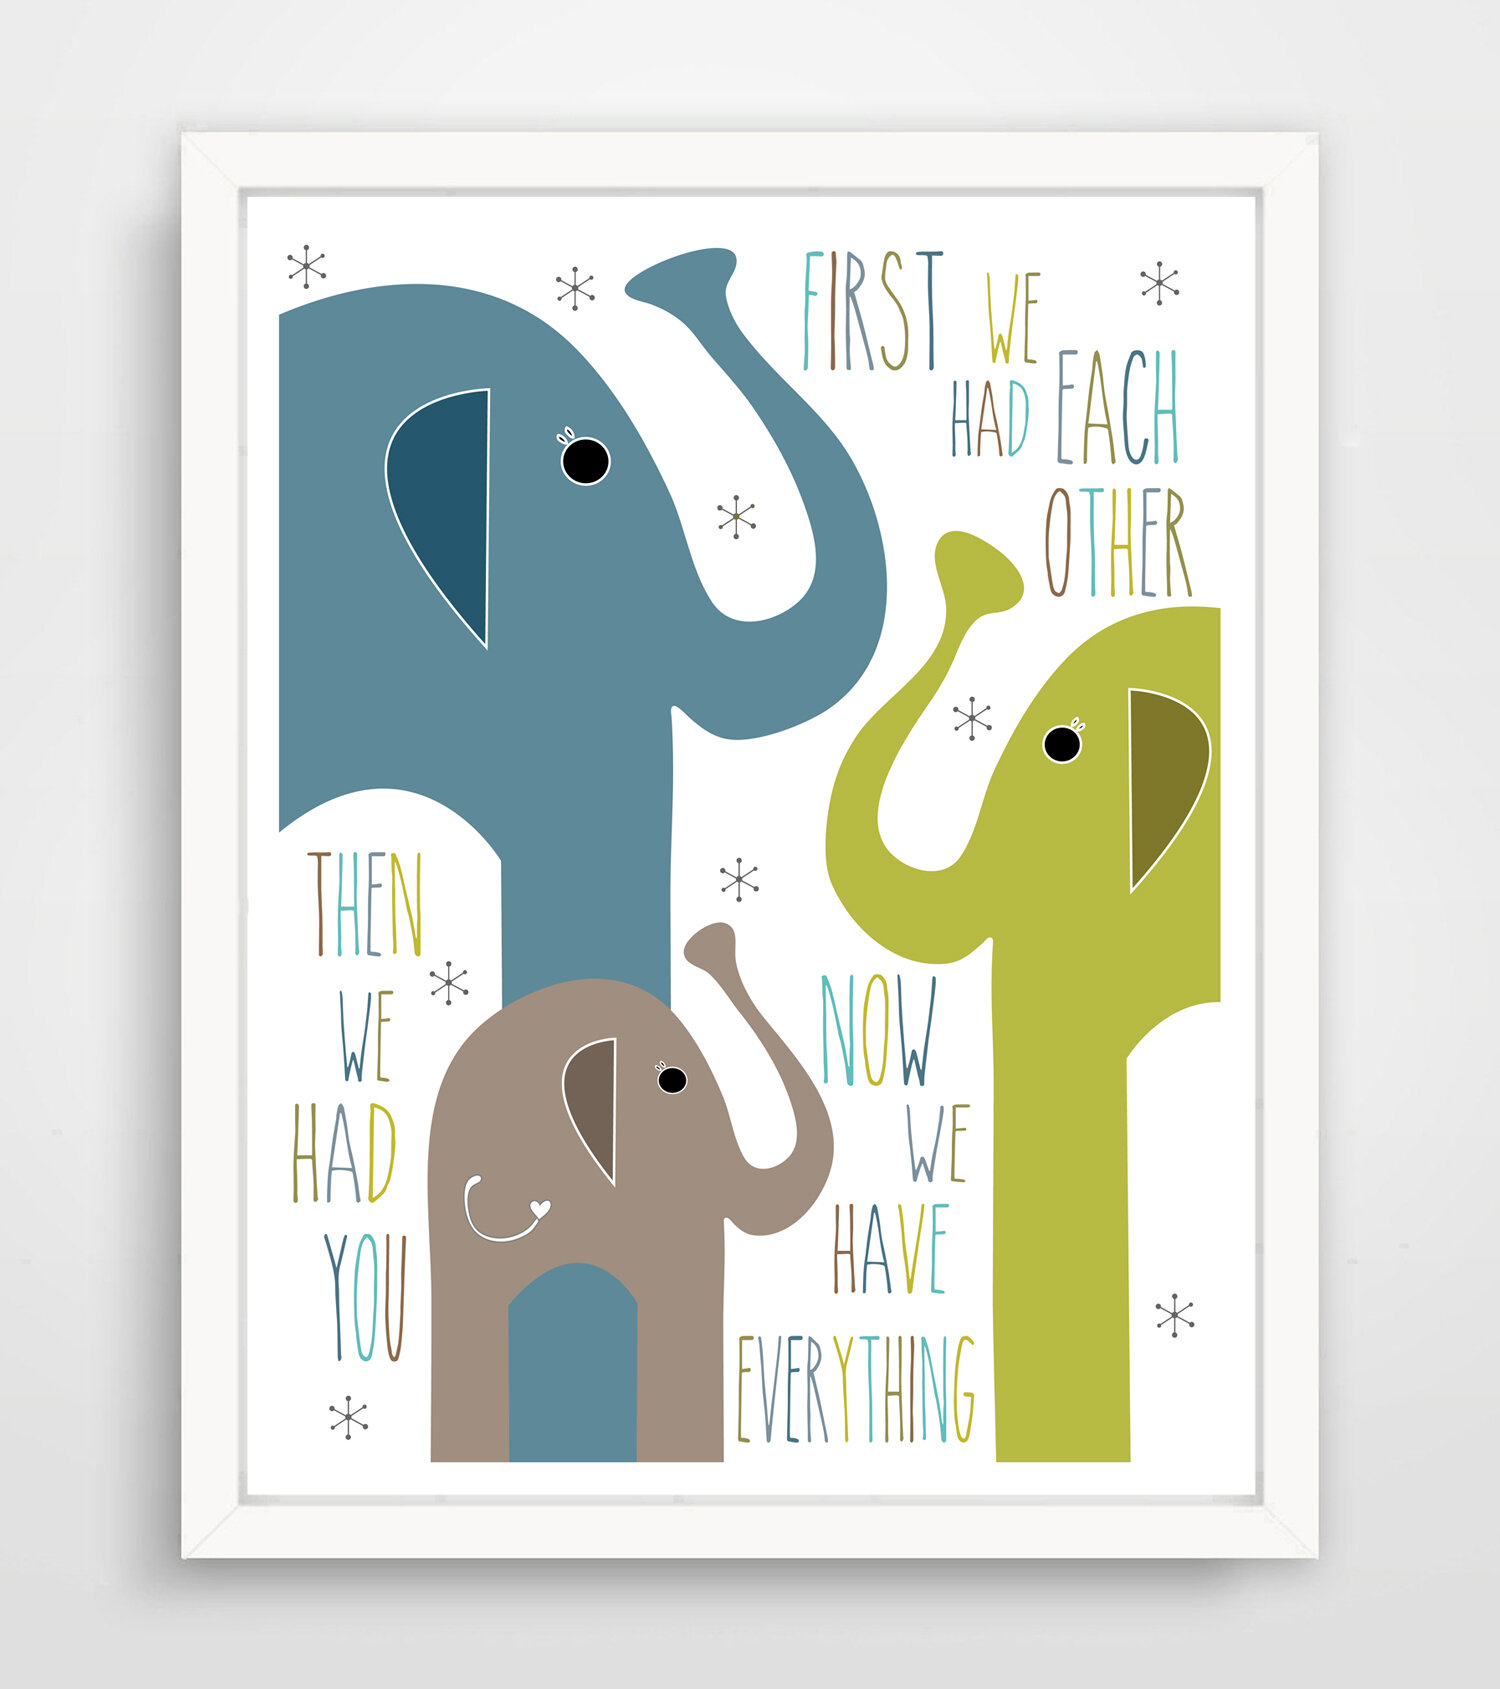 now we have everything First we had each other Print. then we had you